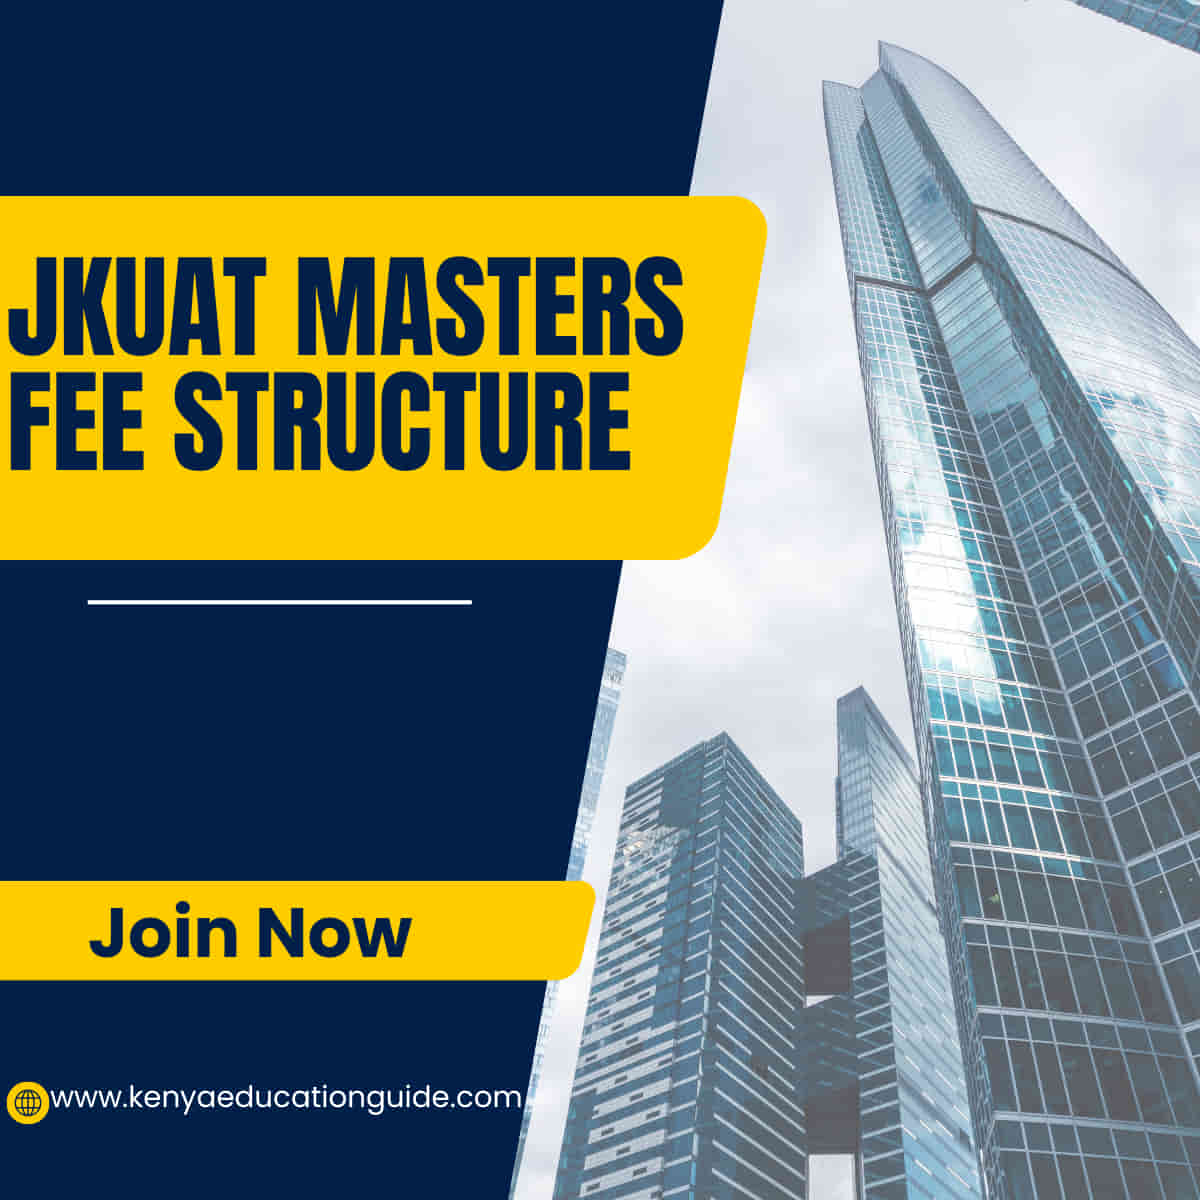 JKUAT masters fee structure